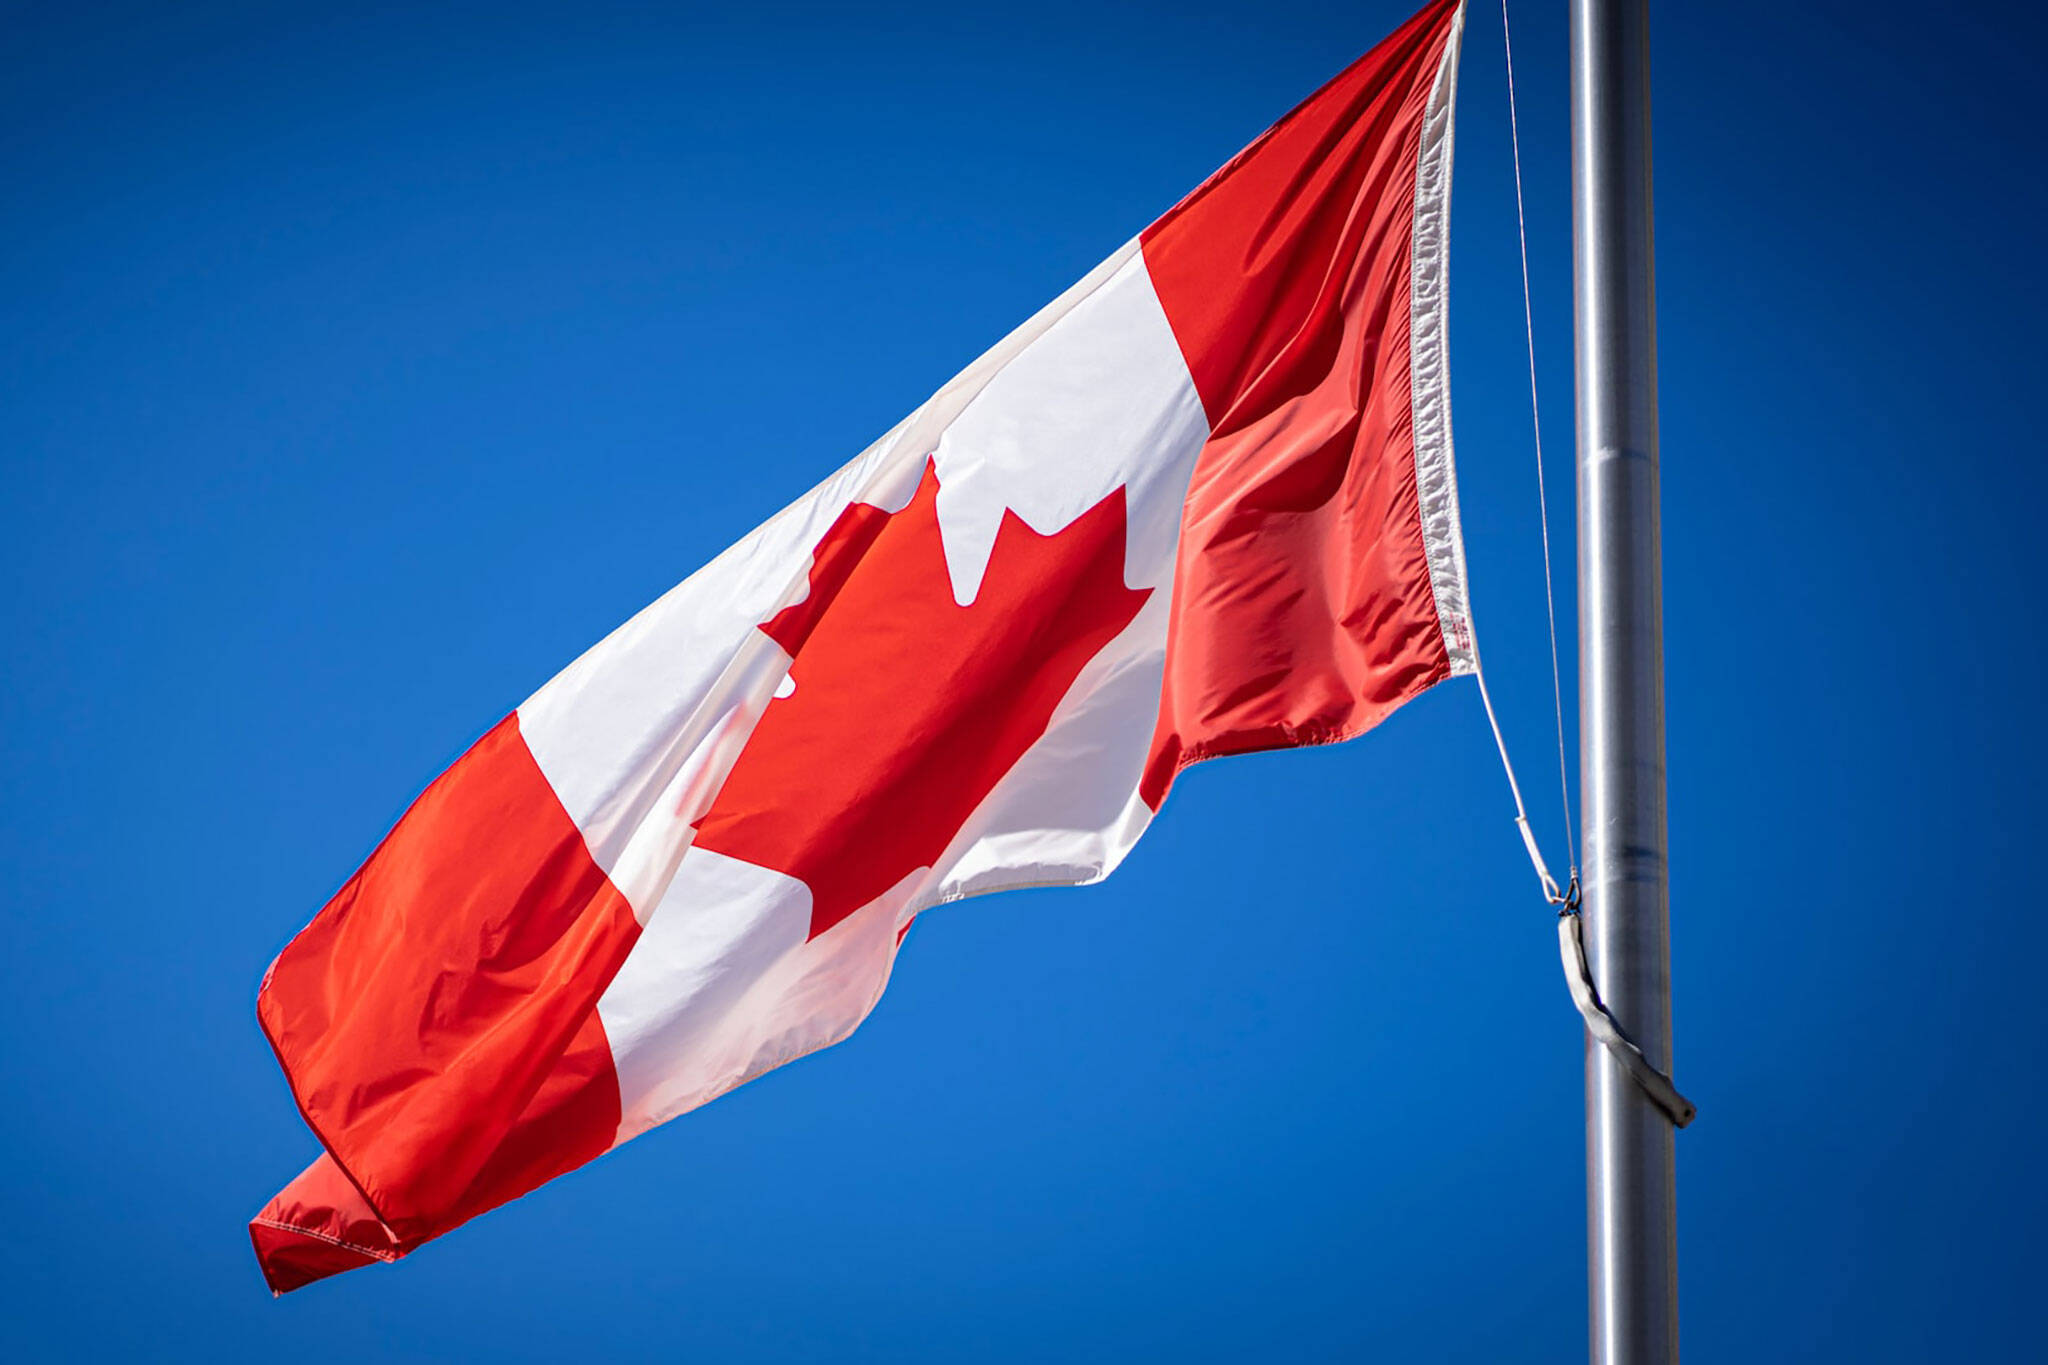 Vaughan lowers flags to half-mast as city reacts to tragic mass shooting